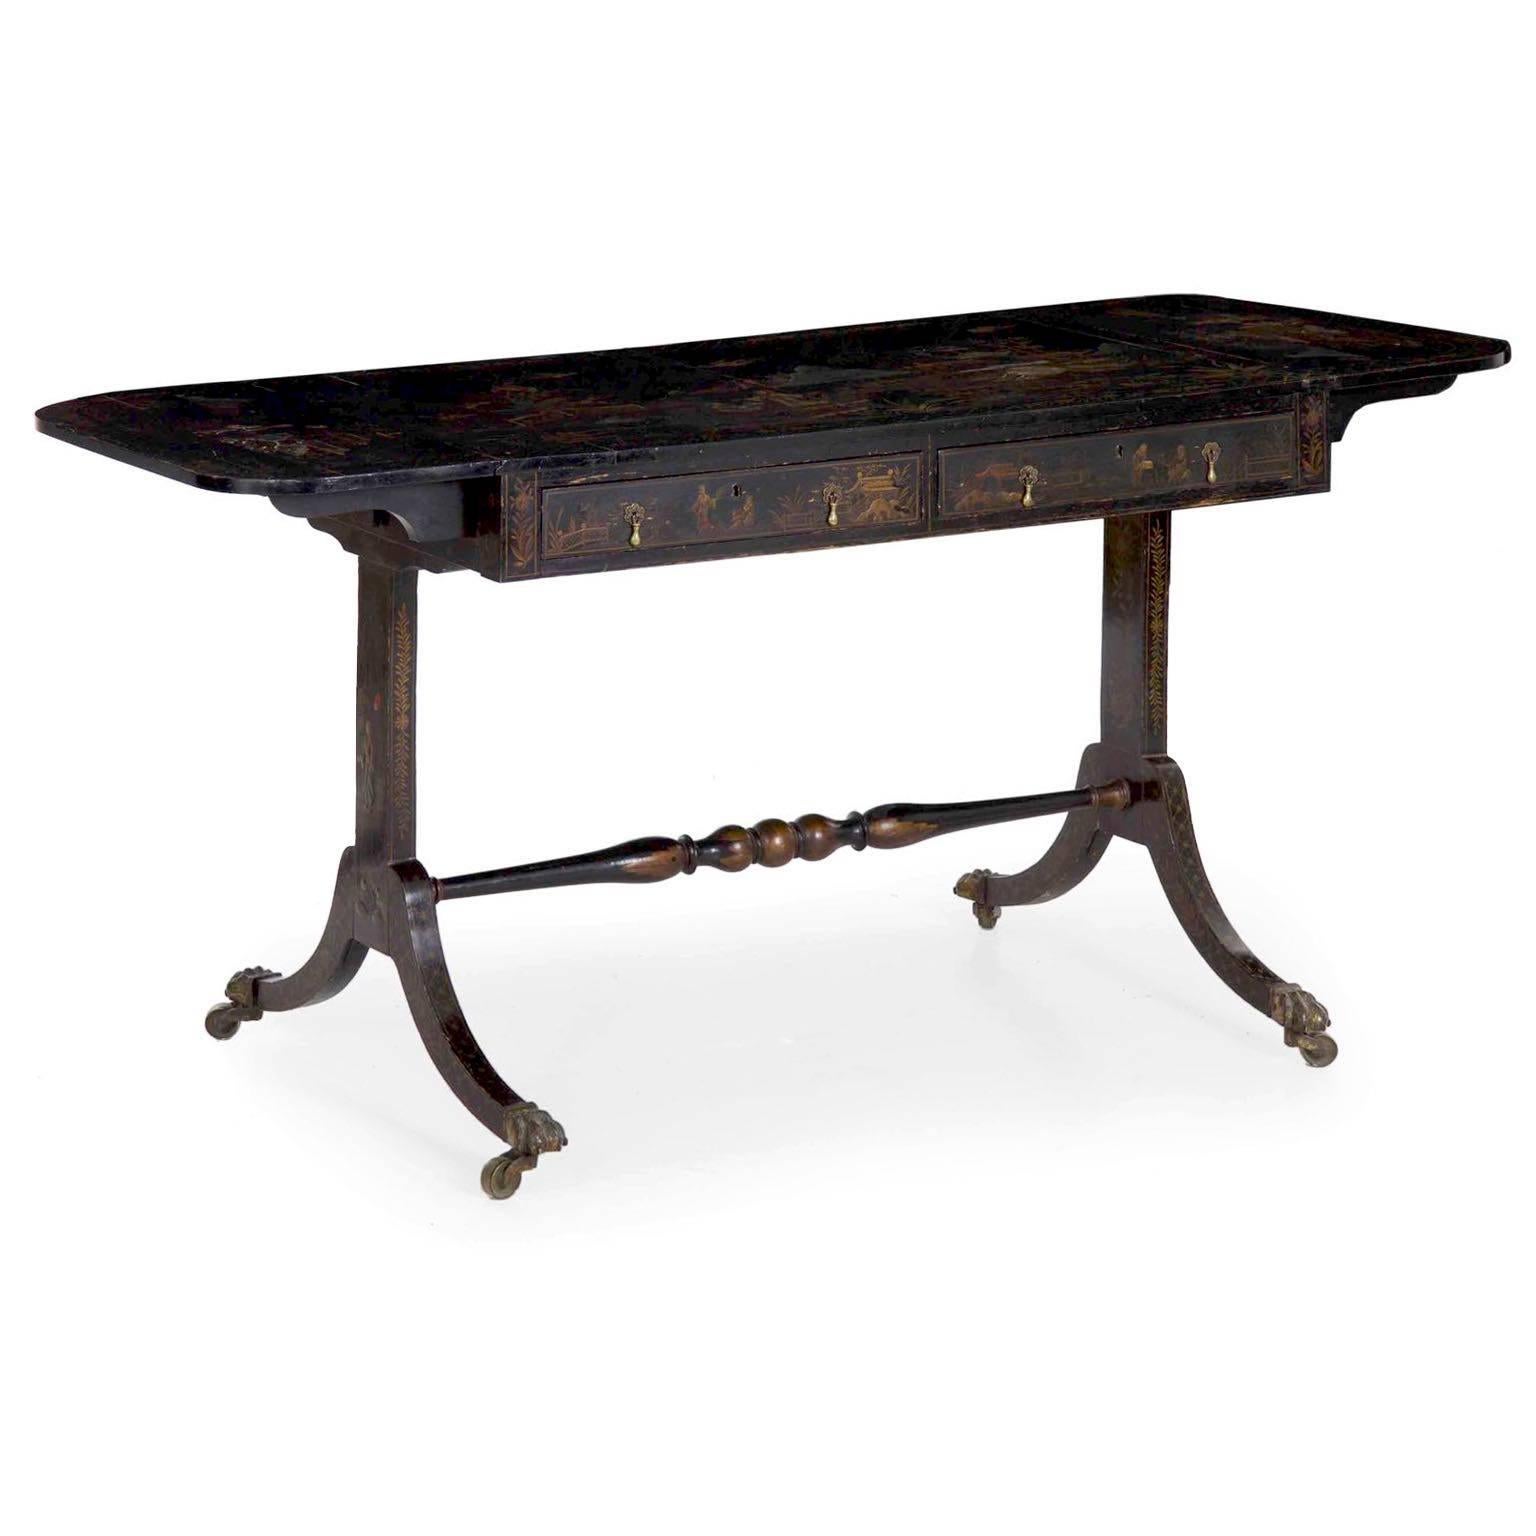 A finely decorated sofa table of the Regency period, it has been beautifully embossed with an ebonized and lacquered chinoiserie display. Reflecting a passion for the Orient during the early 19th century, the table shows rich scenes of figures by